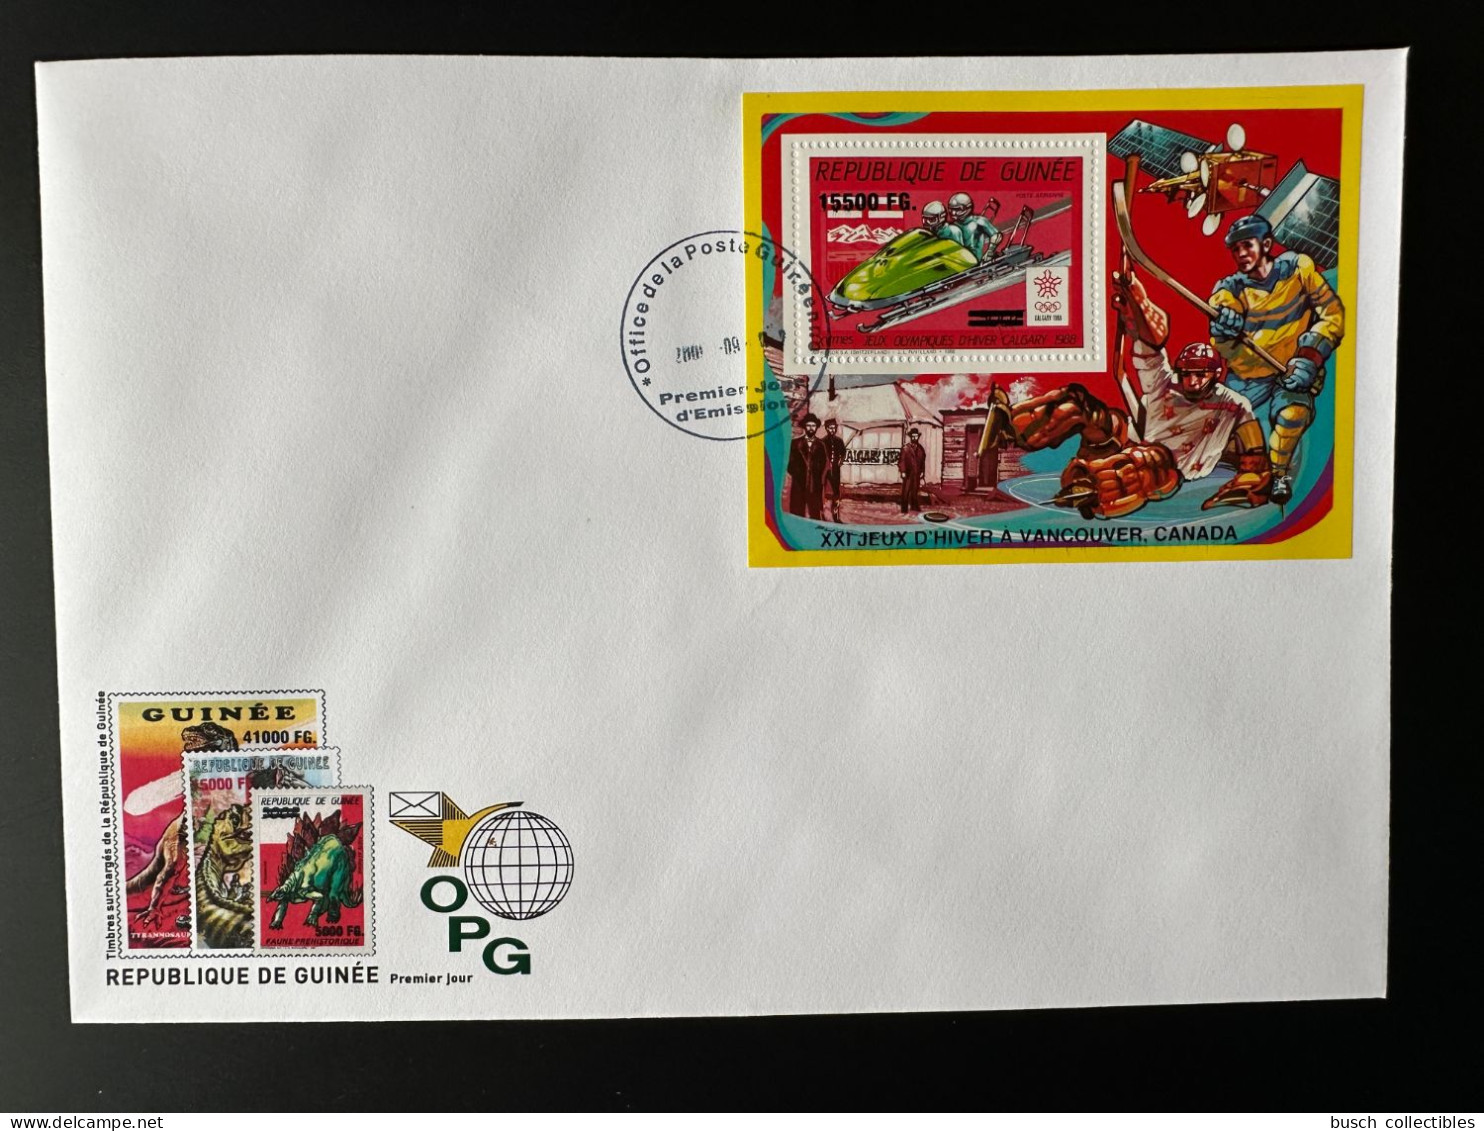 Guinée Guinea 2009 FDC Mi. Bl. 1727 Surch Overprint Winter Olympic Calgary 1988 Vancouver 2010 Jeux Olympiques Bobsleigh - Inverno1988: Calgary